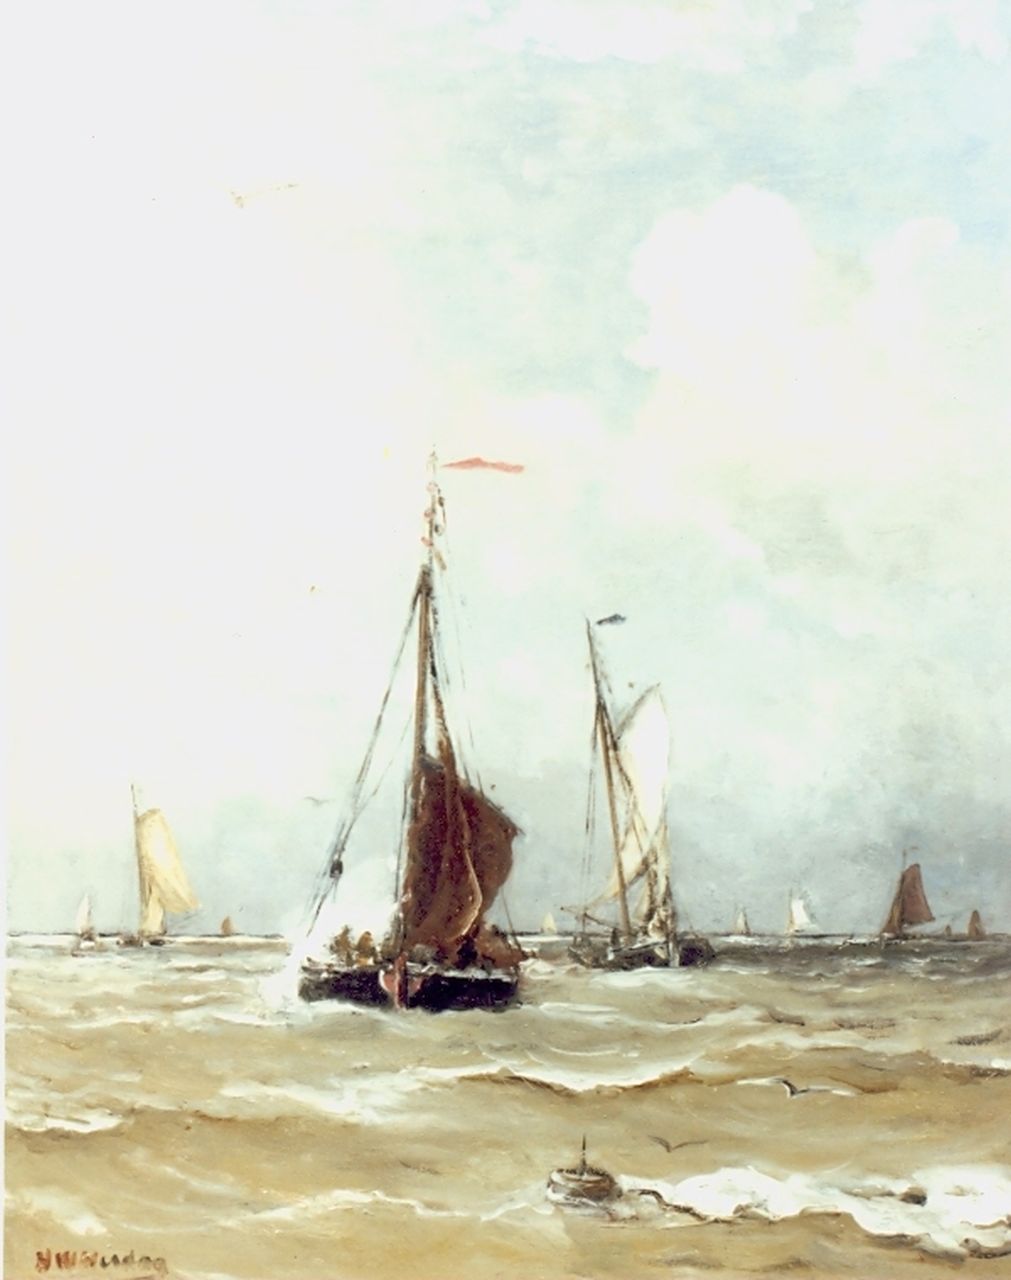 Mesdag H.W.  | Hendrik Willem Mesdag, Fishing boats at sea, oil on canvas 50.0 x 40.0 cm, signed l.l.